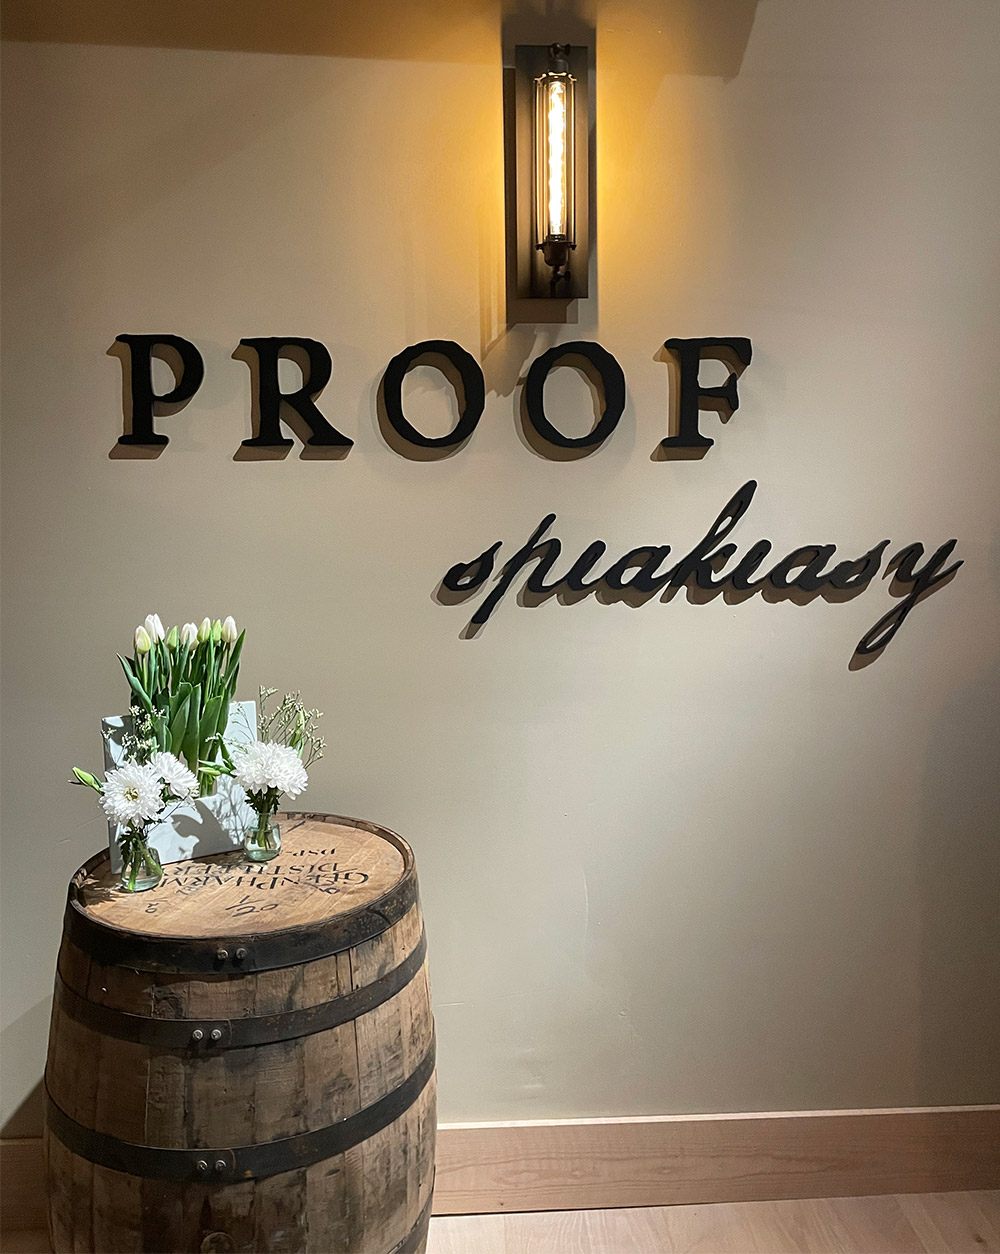 Simply Serving Event at Proof Speakeasy